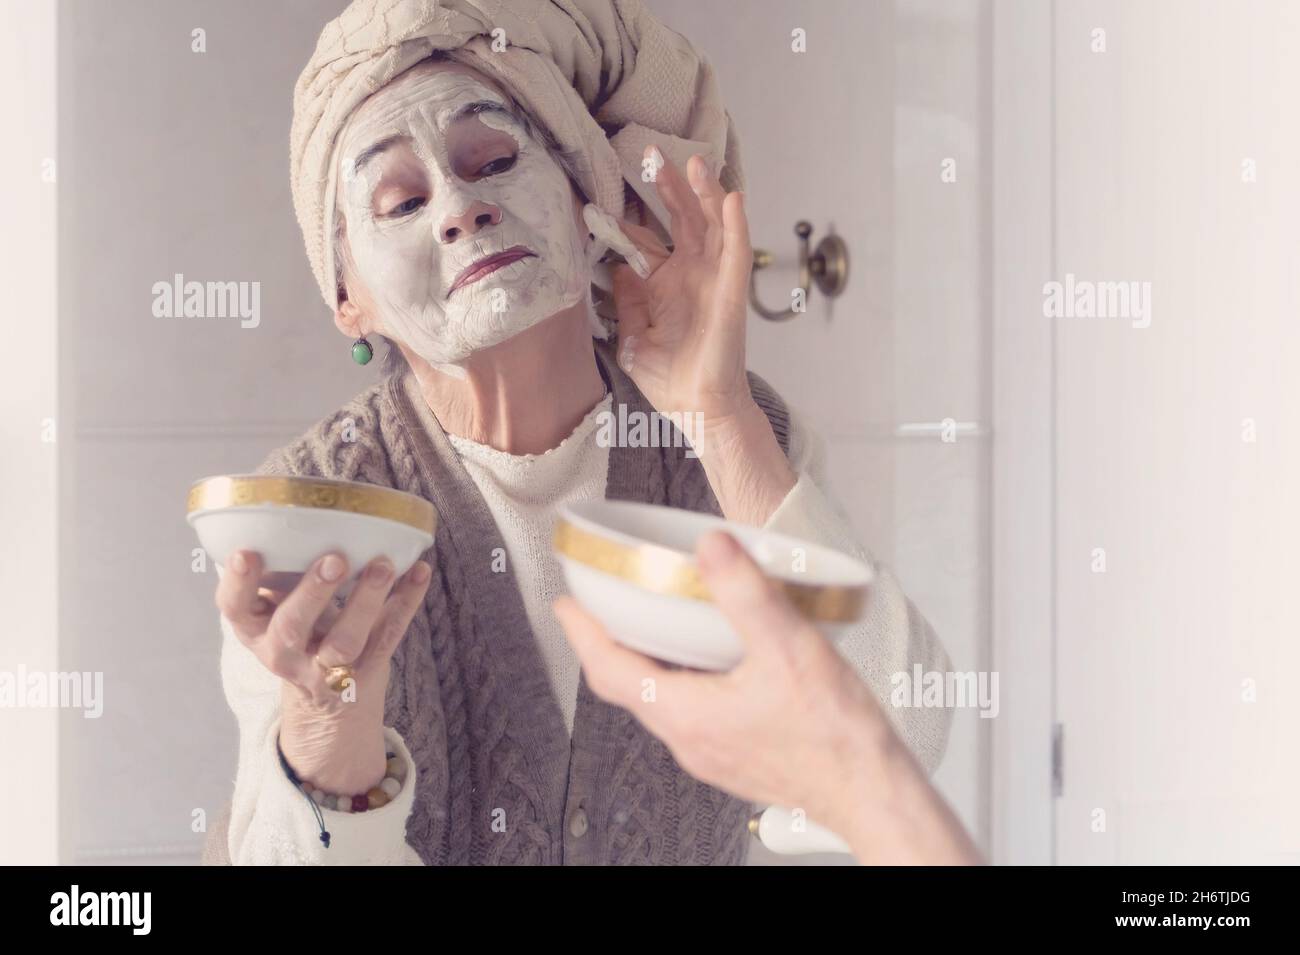 lderly woman with towel on her head smiles and applies cleansing mask . Stock Photo